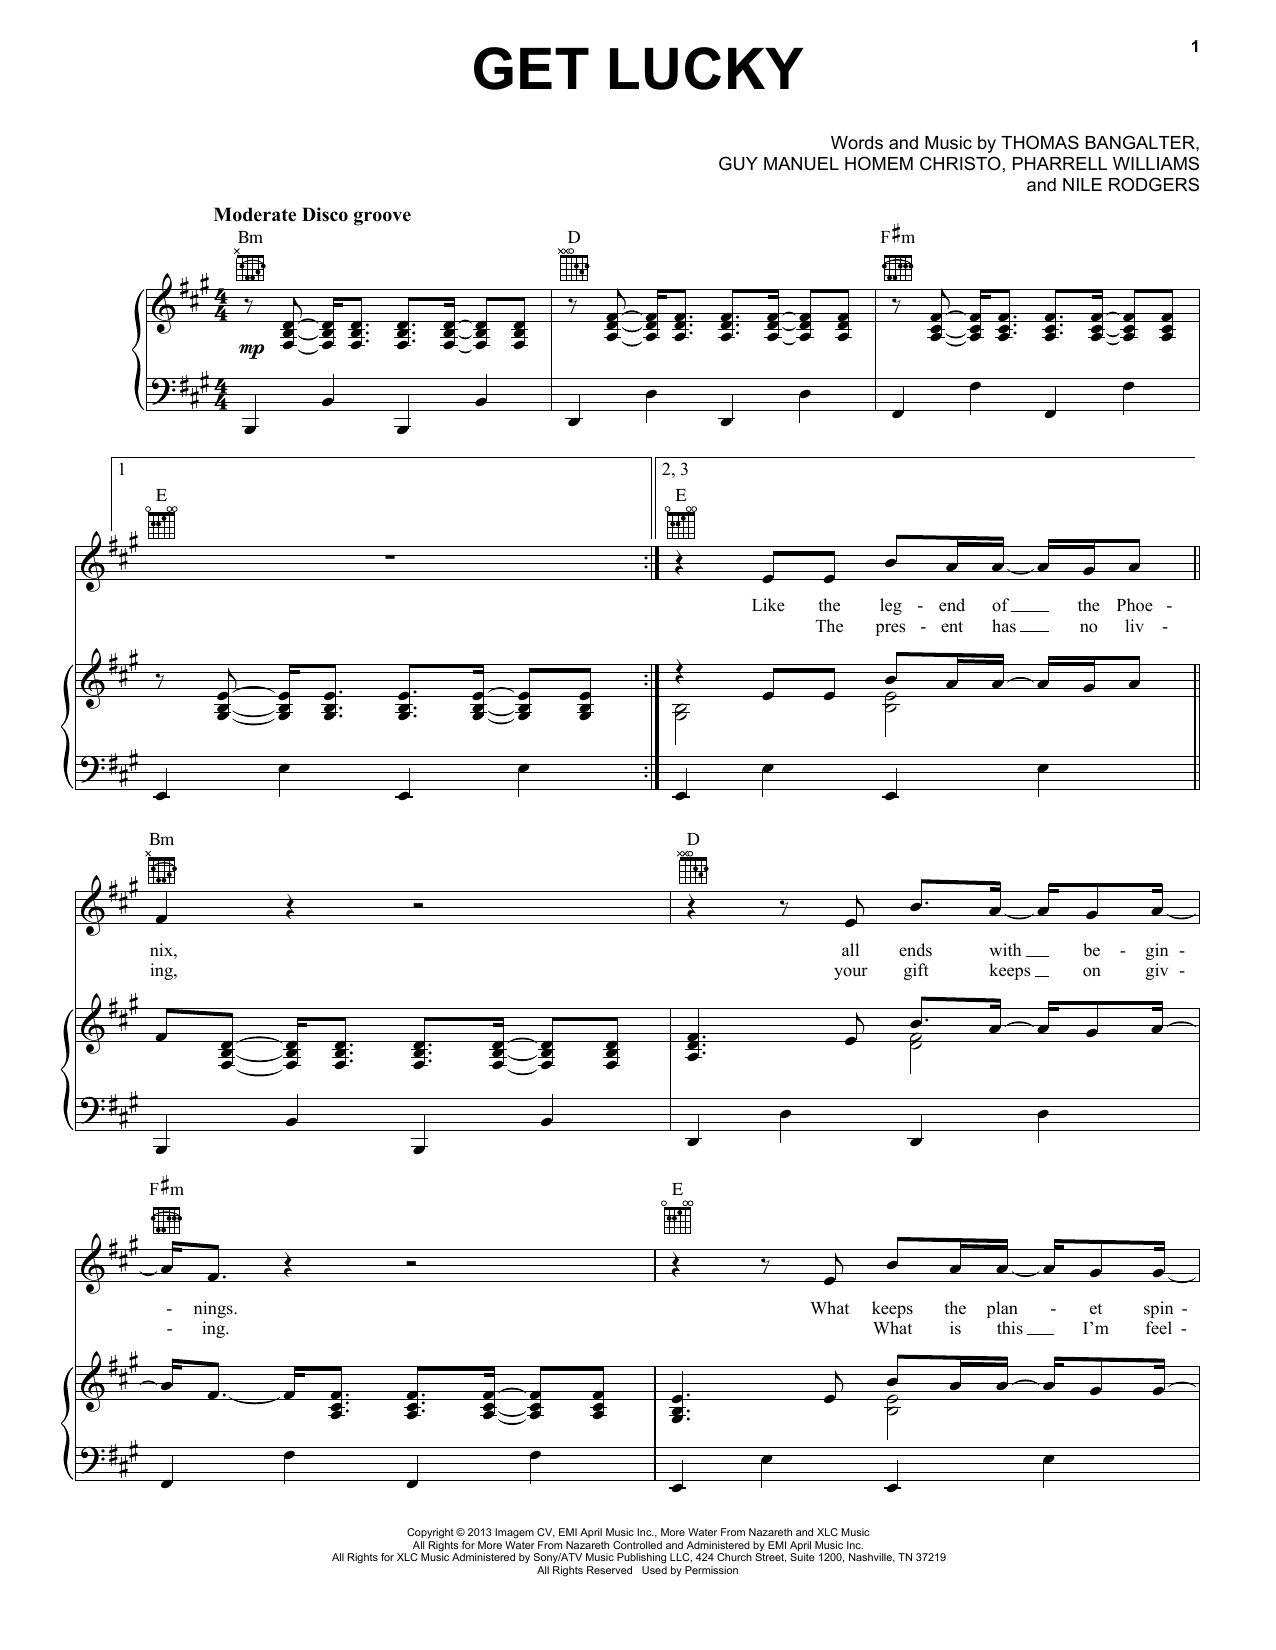 wireless Slime Good luck Daft Punk "Get Lucky" Sheet Music PDF Notes, Chords | Pop Score Piano,  Vocal & Guitar (Right-Hand Melody) Download Printable. SKU: 98206